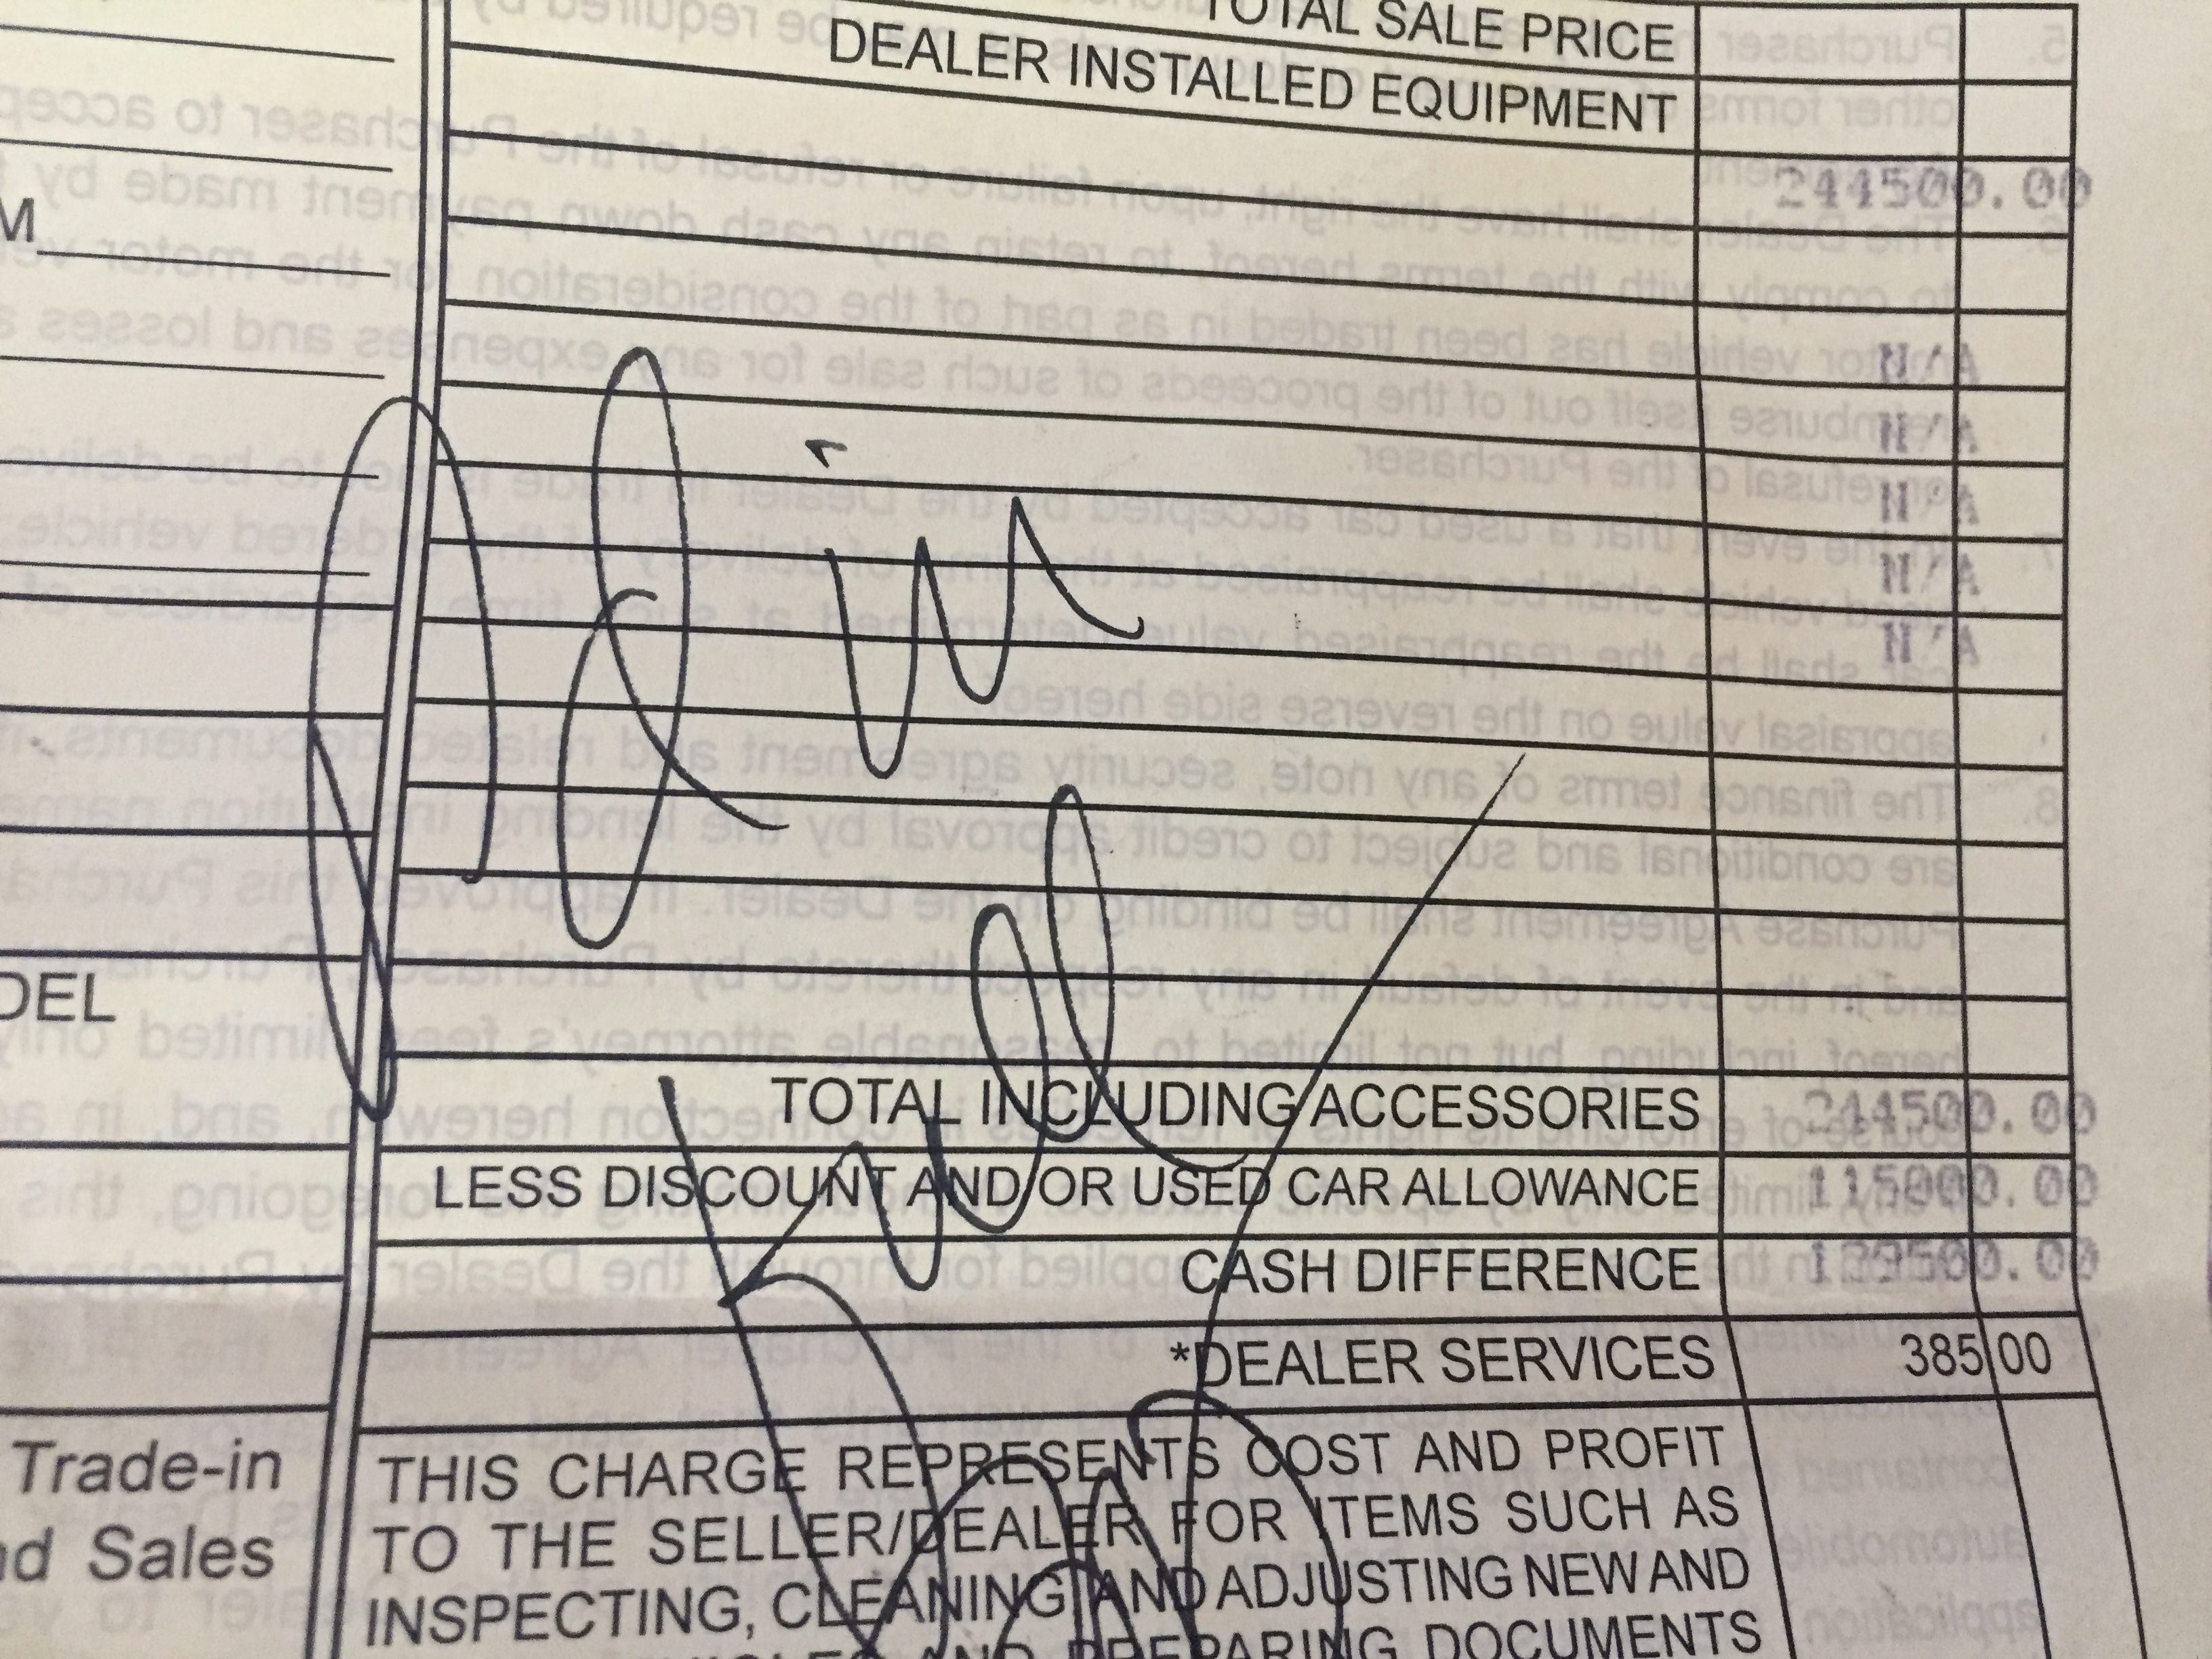 Bill of sale marked "paid in full"